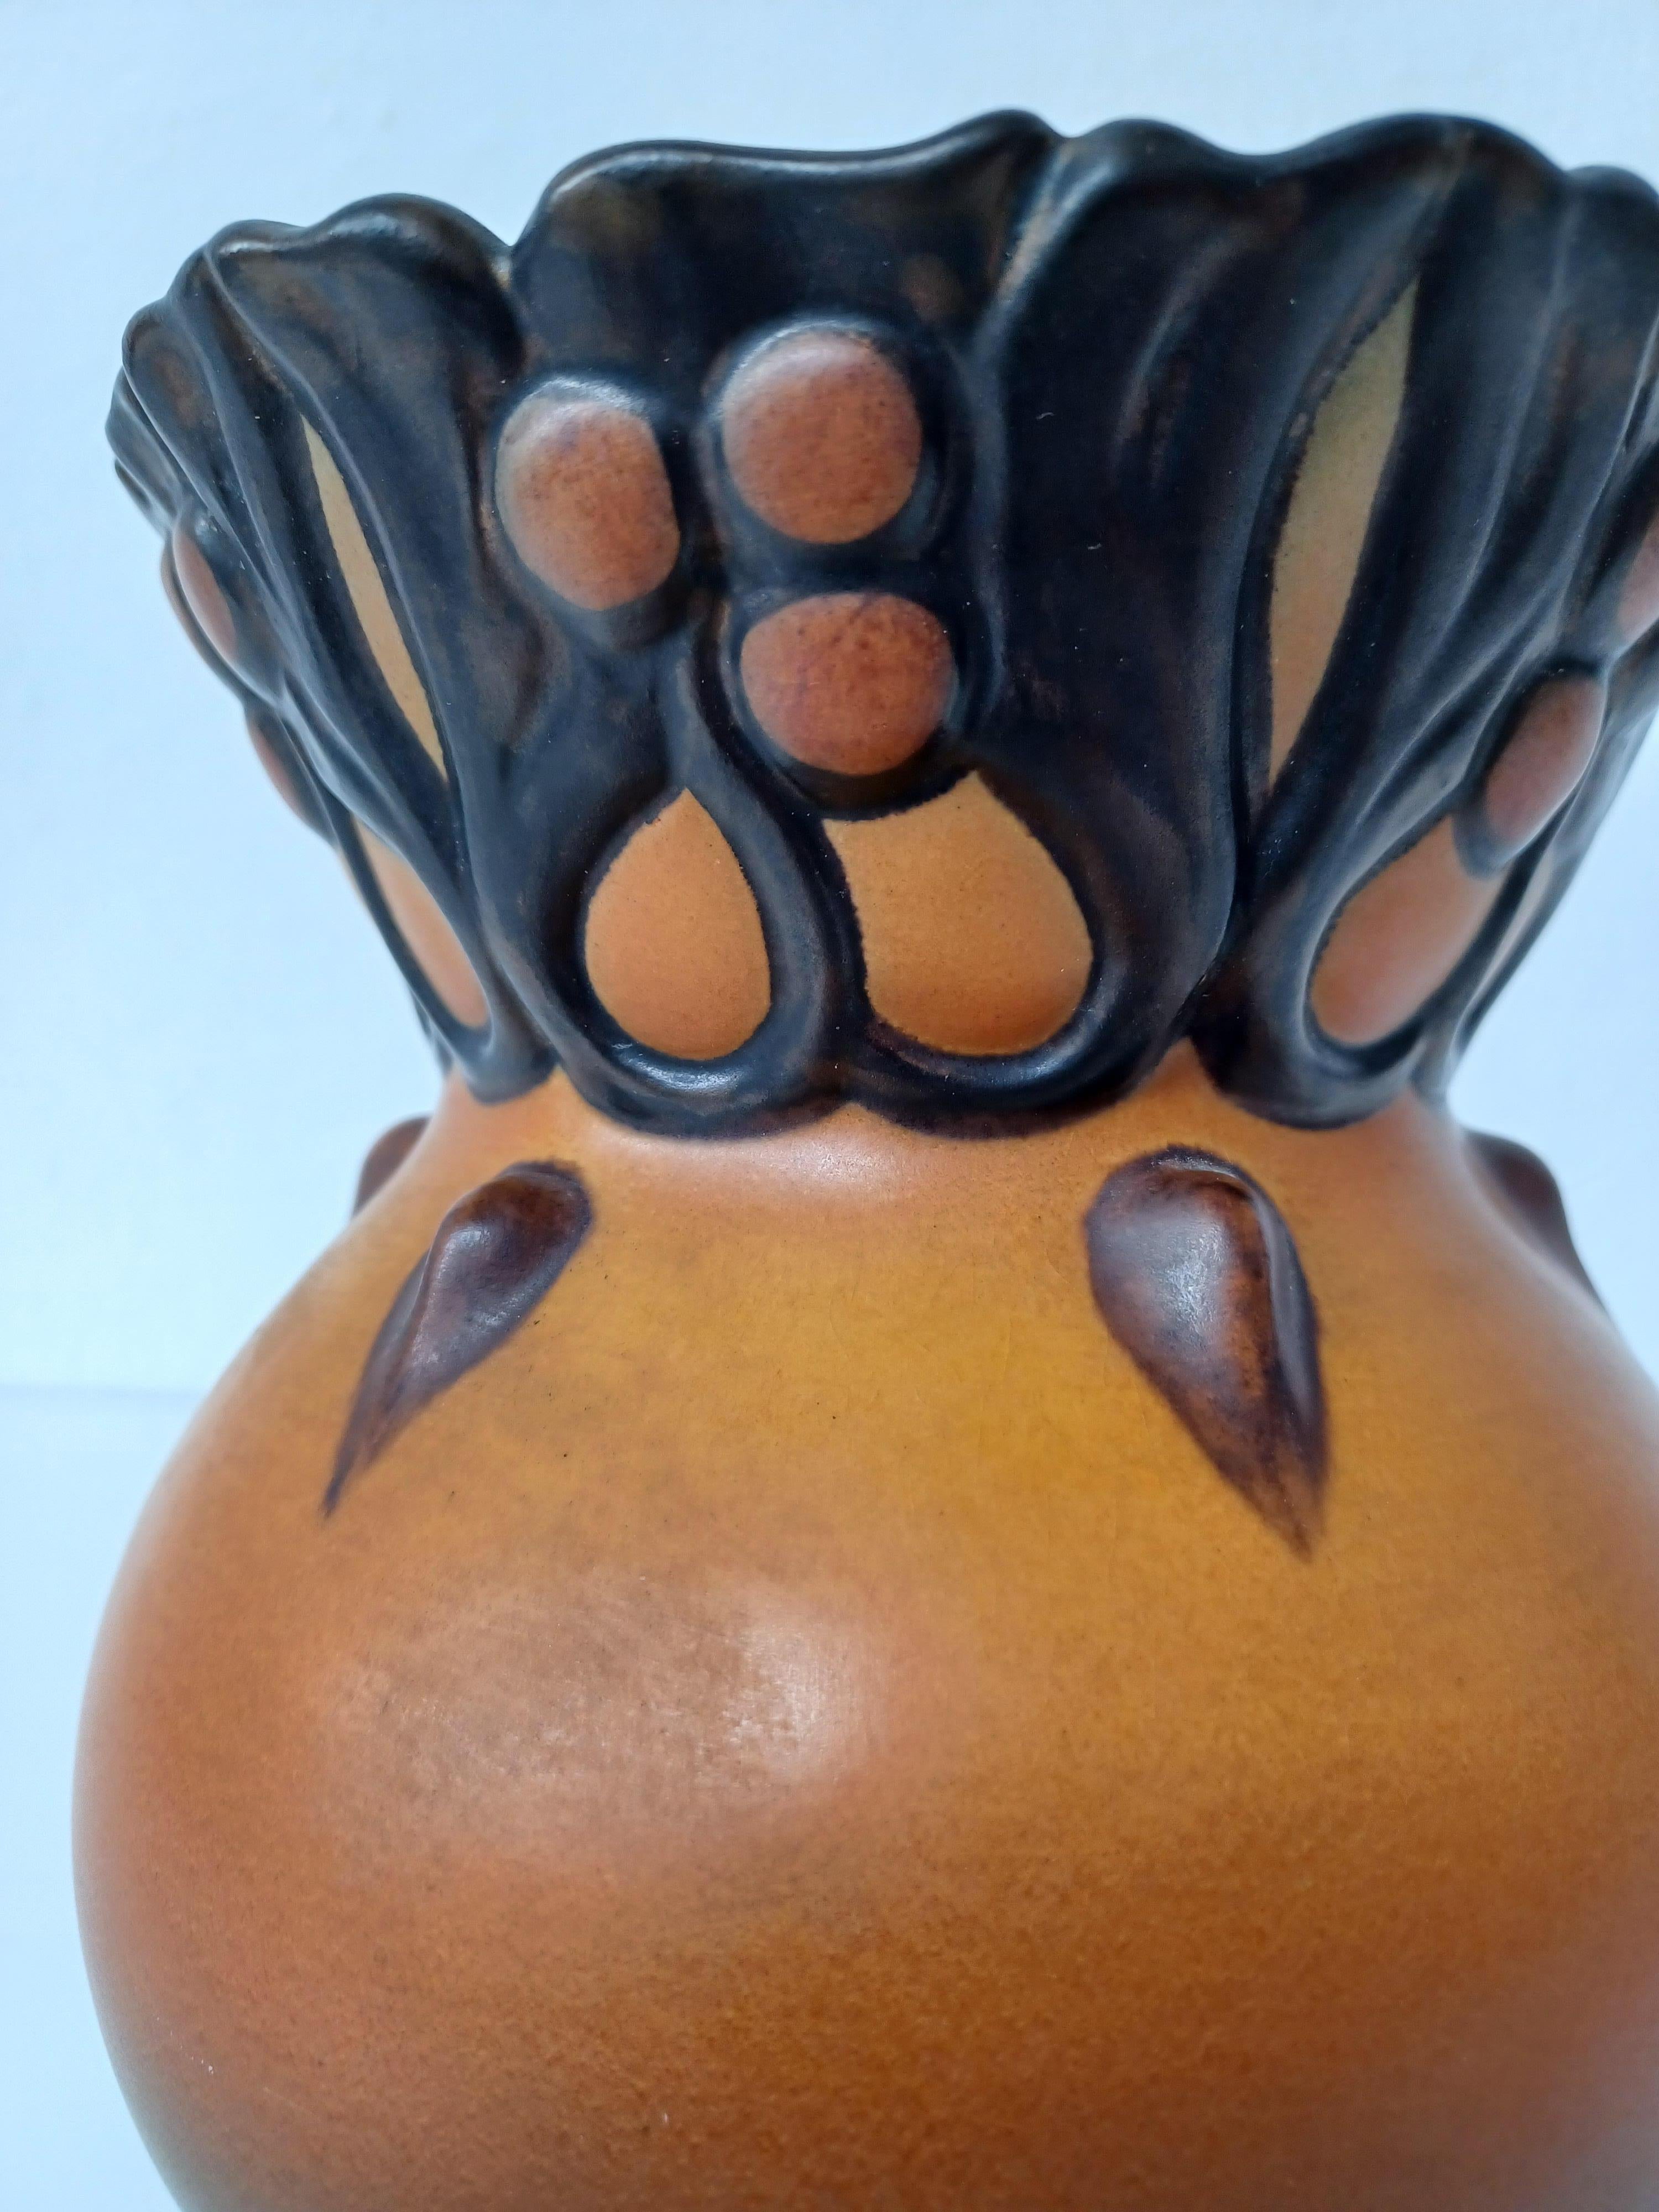 1900's Hand-Crafted Danish Hand-Crafted Art Nouveau Vase by P. Ipsens Enke In Good Condition For Sale In Knebel, DK